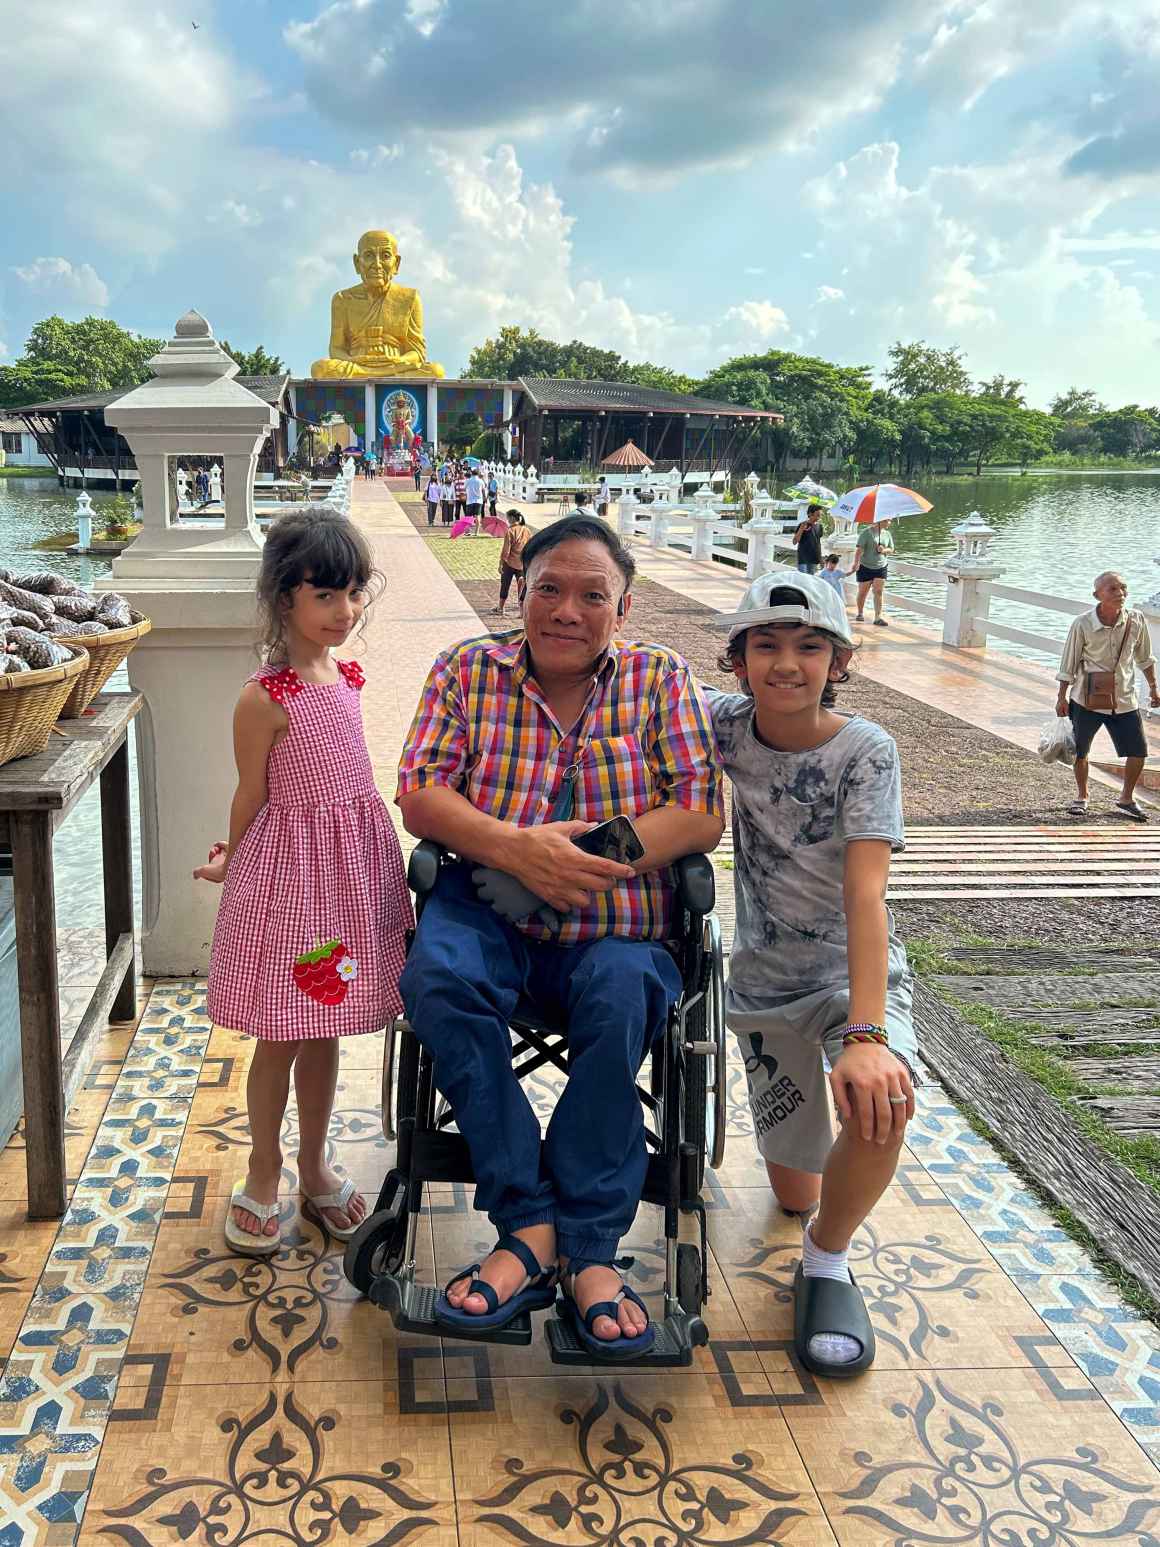 Frank's two children with a family member in a wheelchair in Thailand.